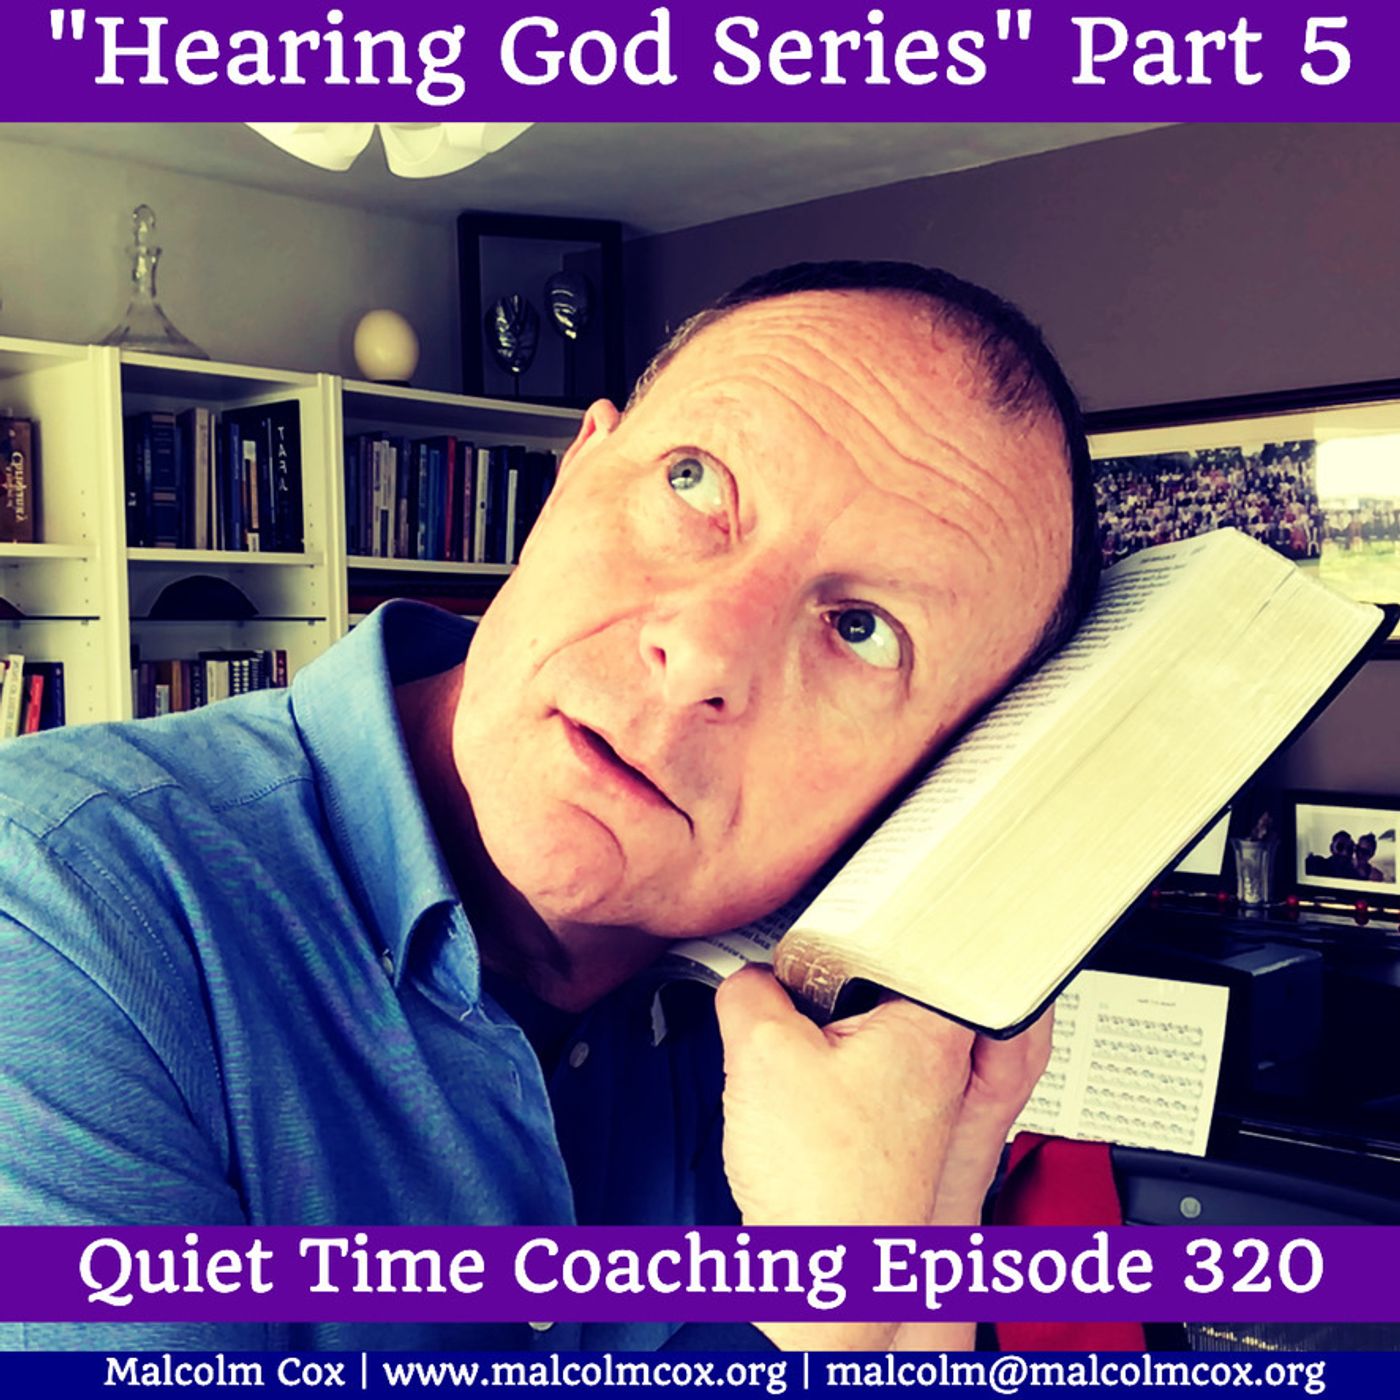 S2 Ep320: Quiet Time Coaching Episode 320 | “Hearing God Series” | Part 5 | Malcolm Cox